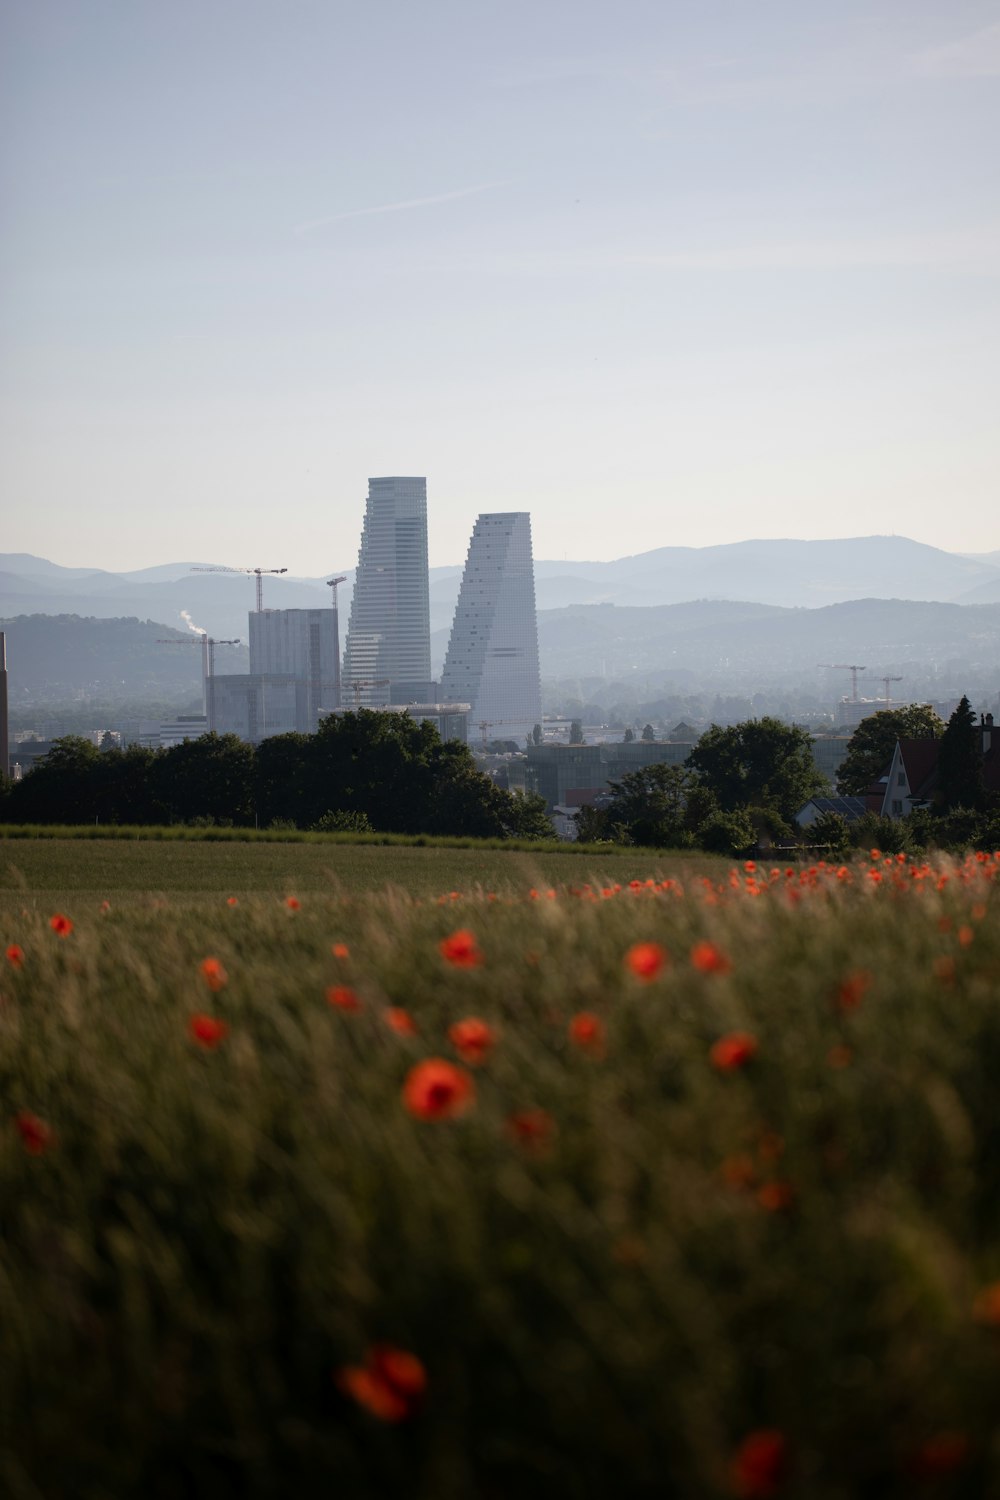 a field of flowers with a city in the background